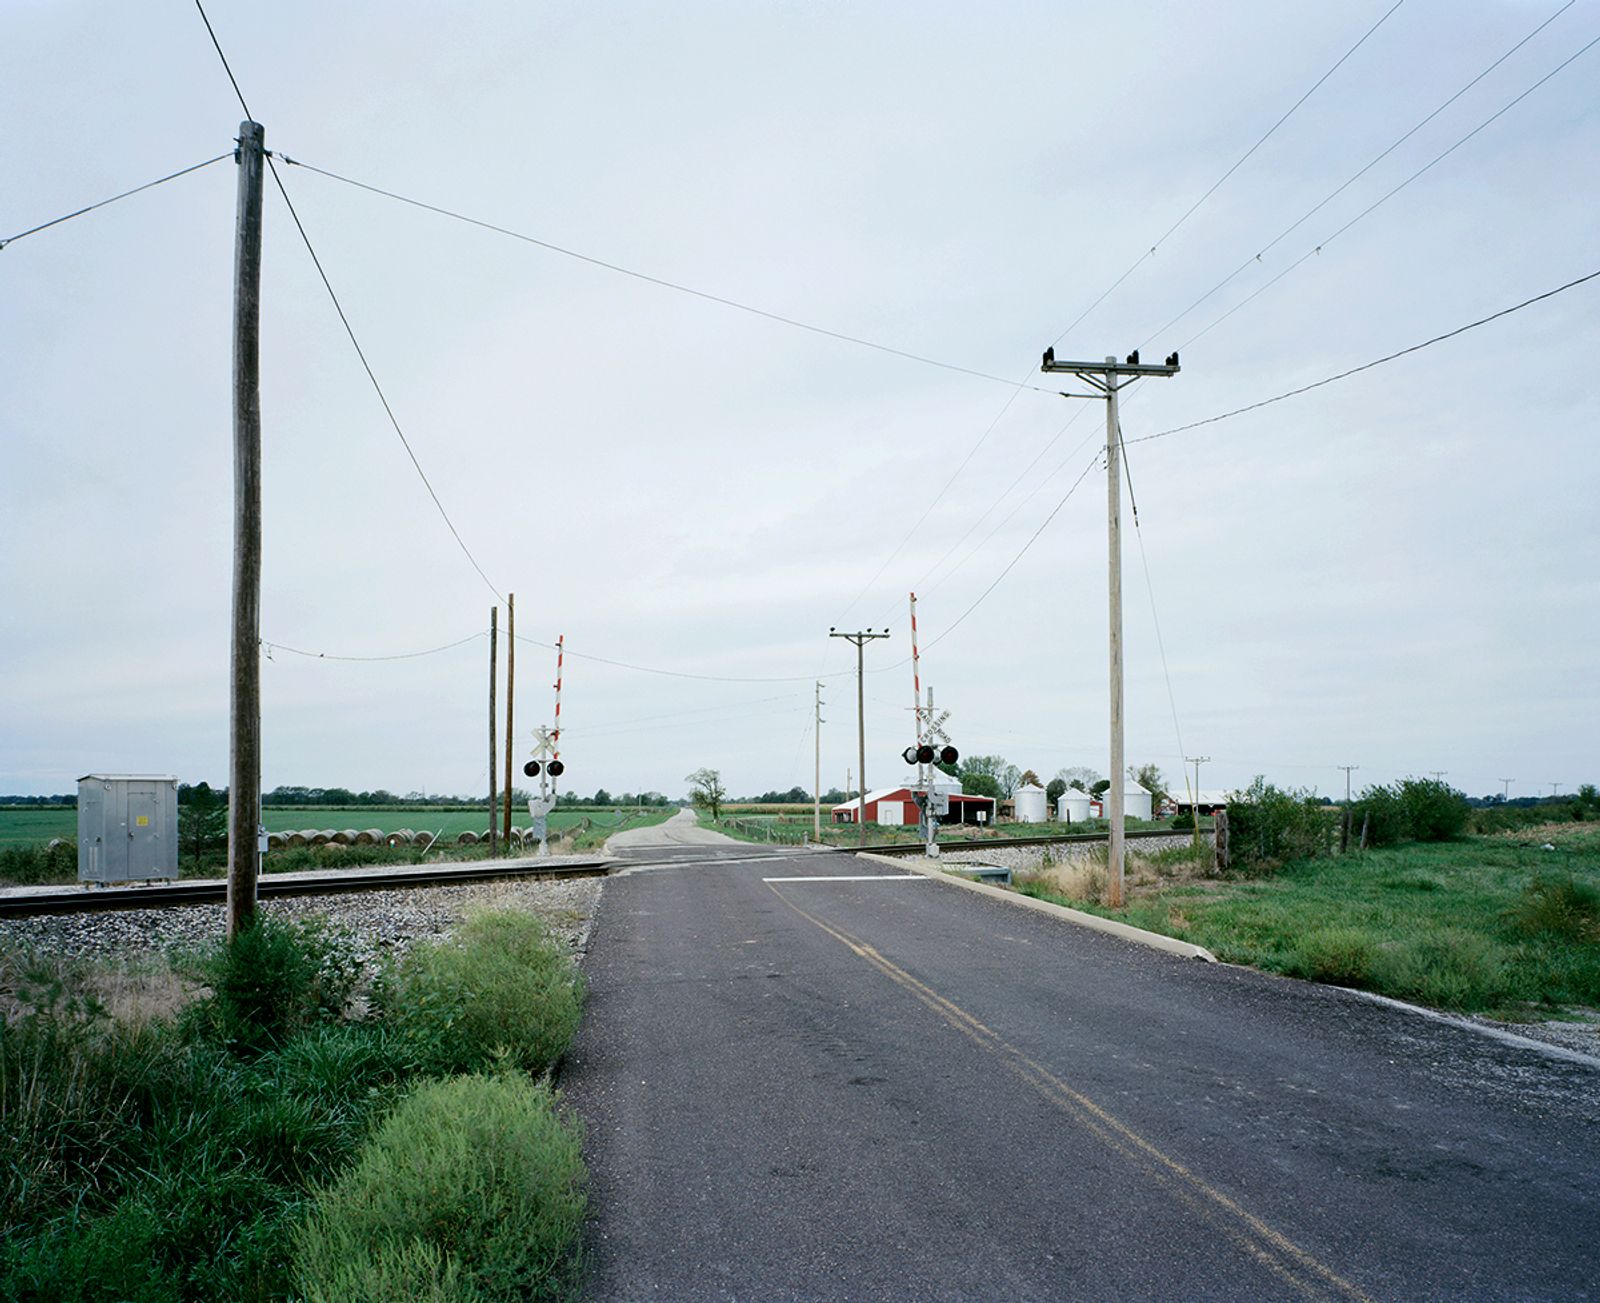 © Mathieu Asselin - Image from the Monsanto: A Photographic Investigation photography project